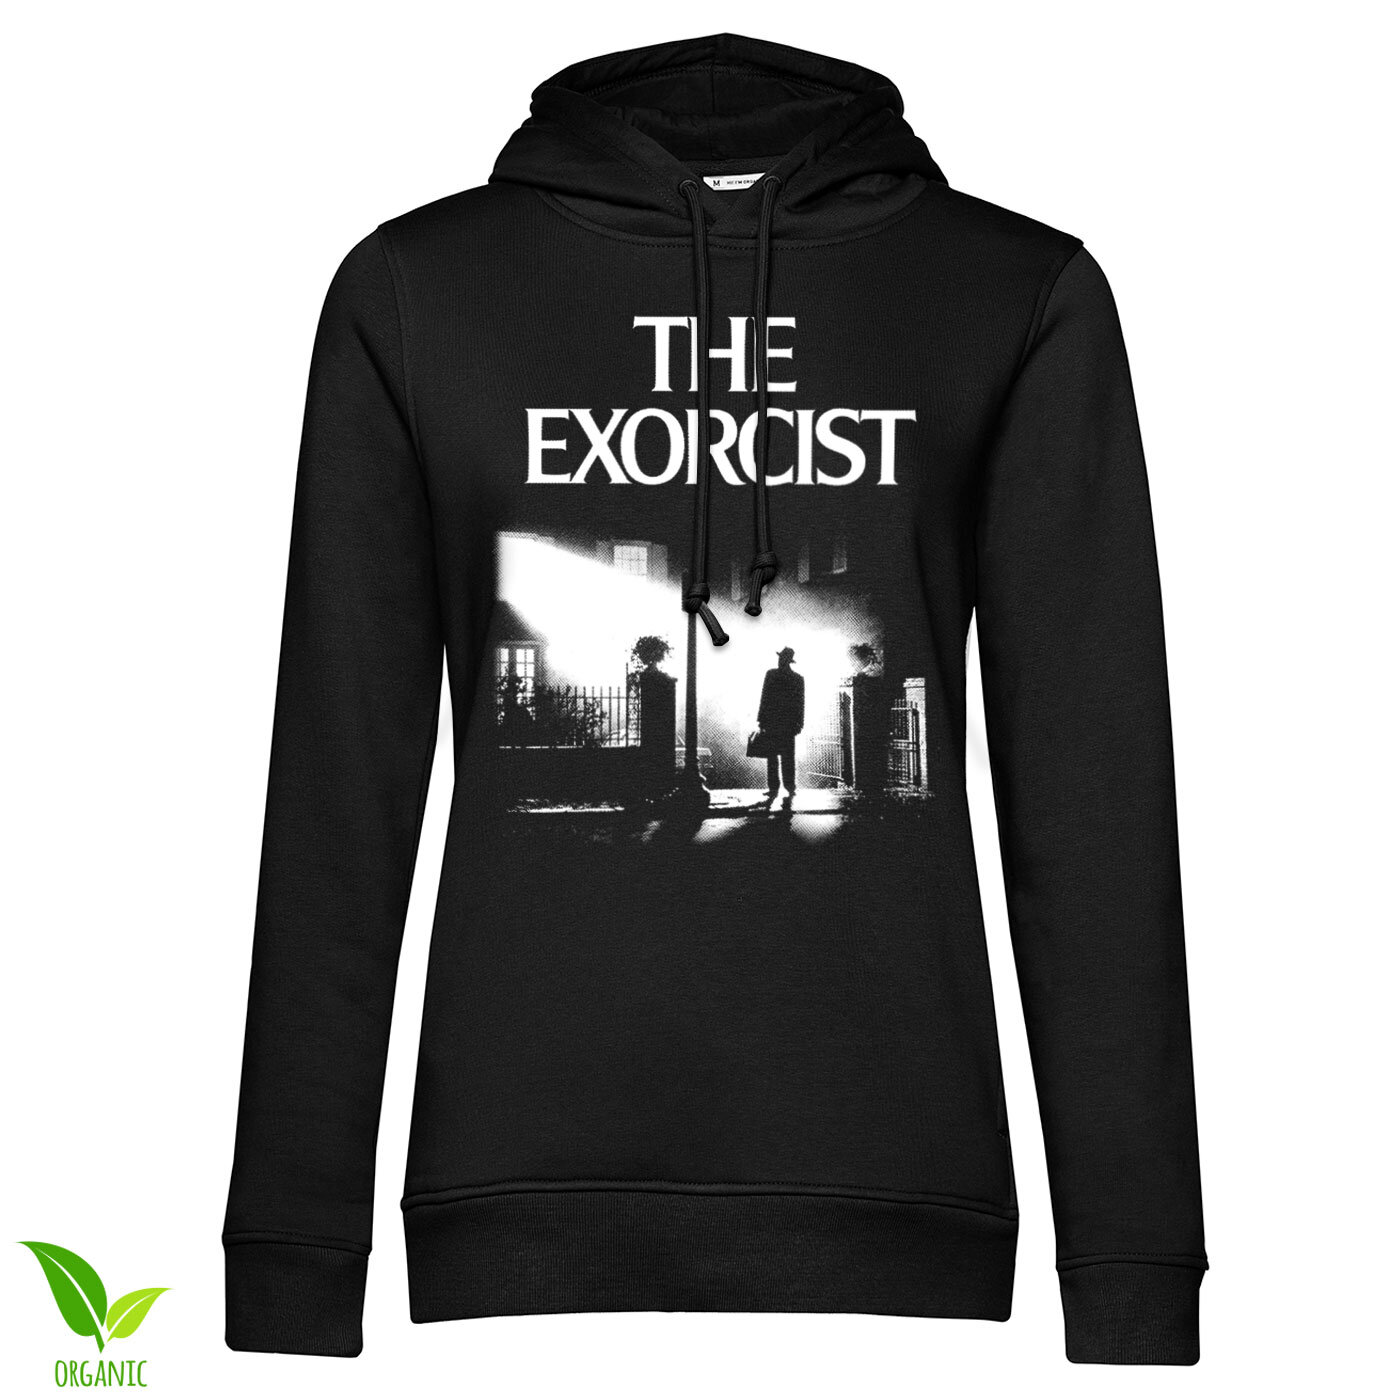 The Exorcist Poster Girls Hoodie